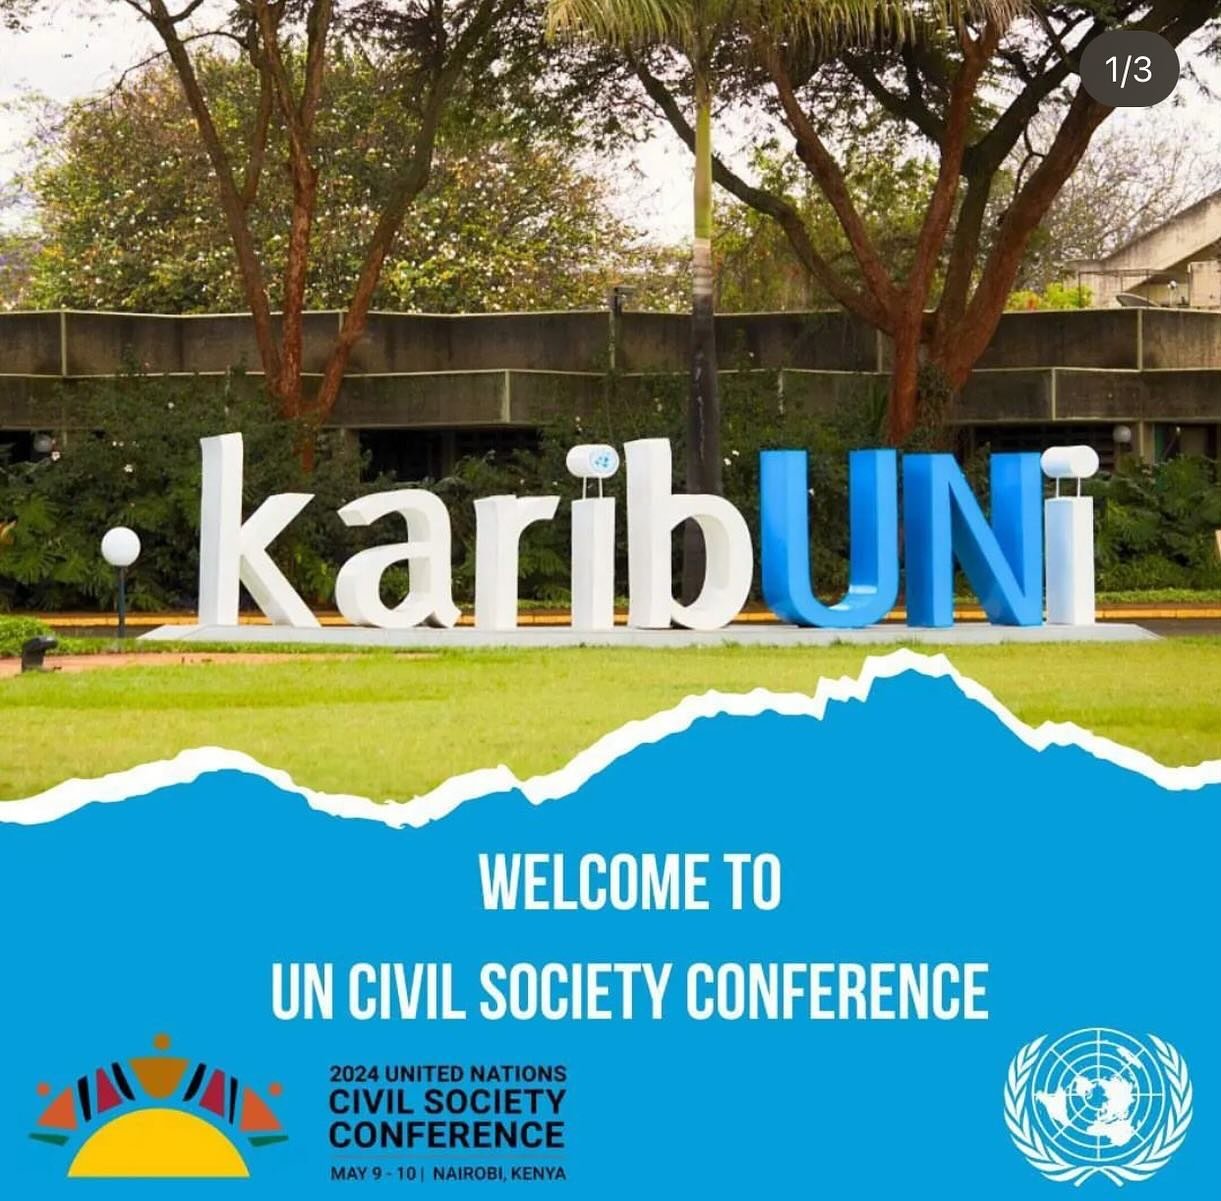 SDI Kenya and Muungano wa Wanavijiji had the opportunity to attend the two-day 2024 United Nations Civil Society Conference on May 9th and May 10th in Nairobi, Kenya. The conference hosted over 4000 delegates, including UN officials, government repre